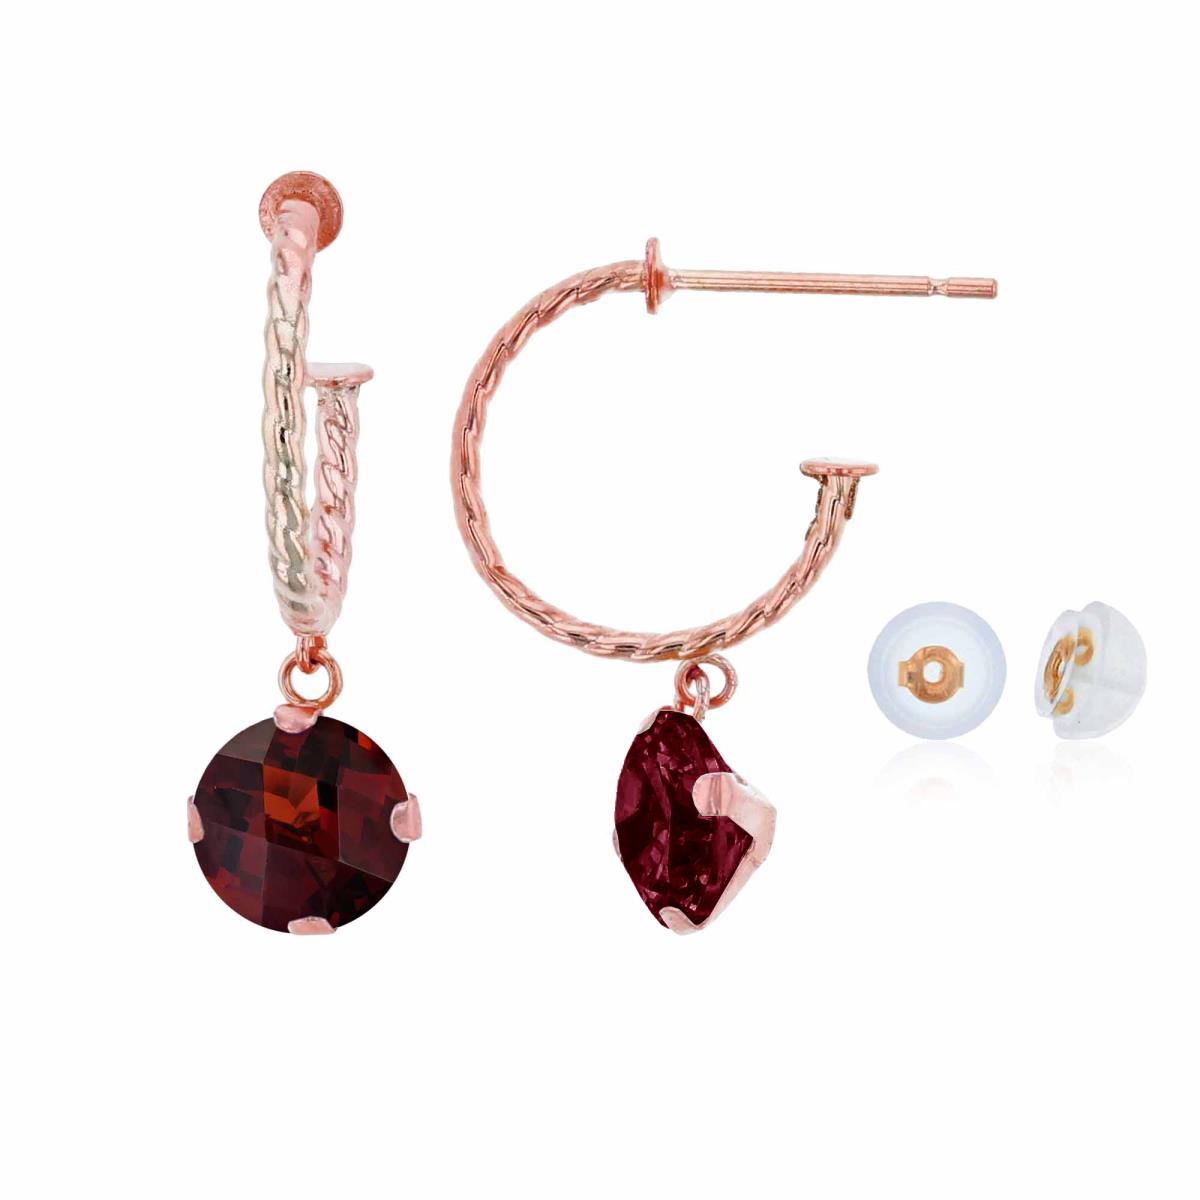 10K Rose Gold 12mm Rope Half-Hoop with 6mm Rd Garnet Martini Drop Earring with Silicone Back